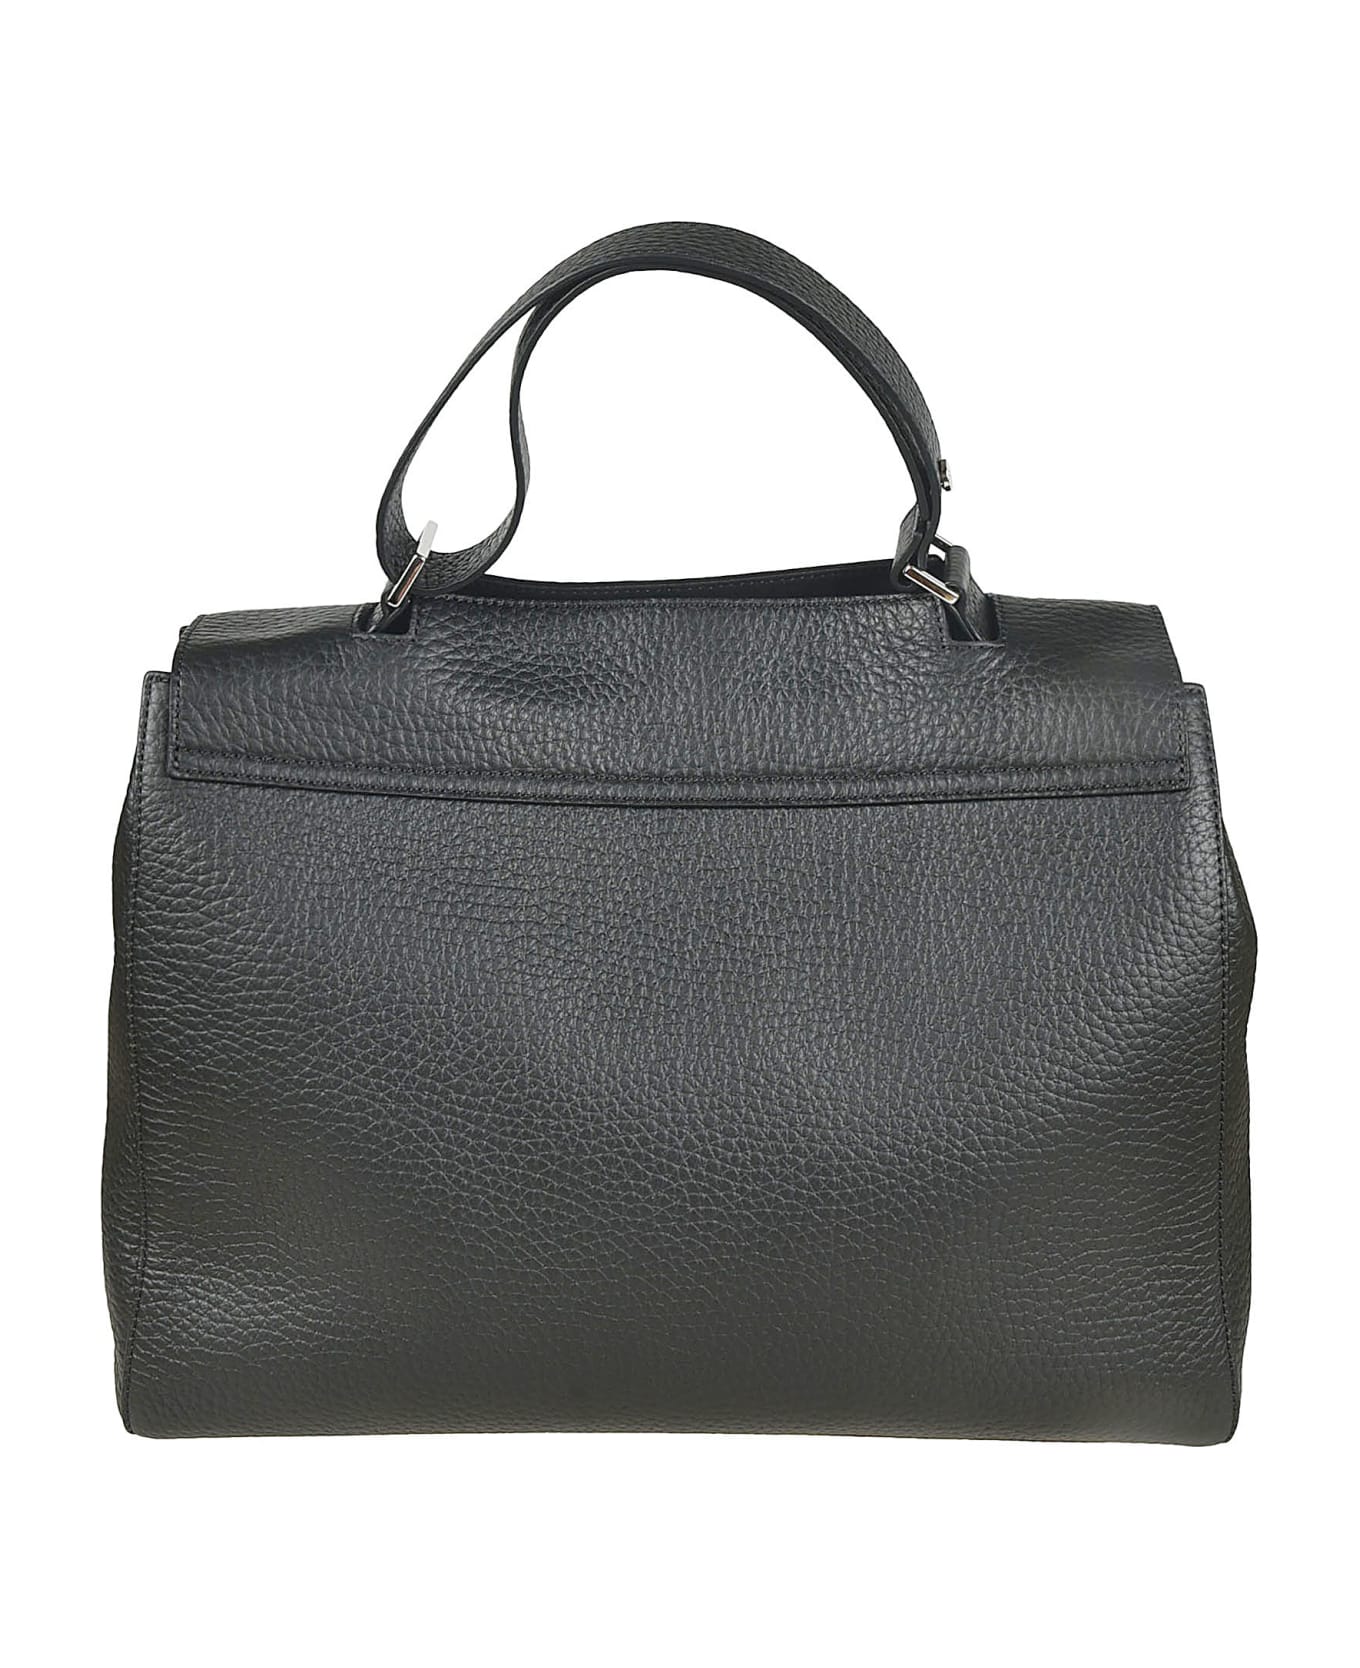 Orciani Logo Top Handle Tote - Black